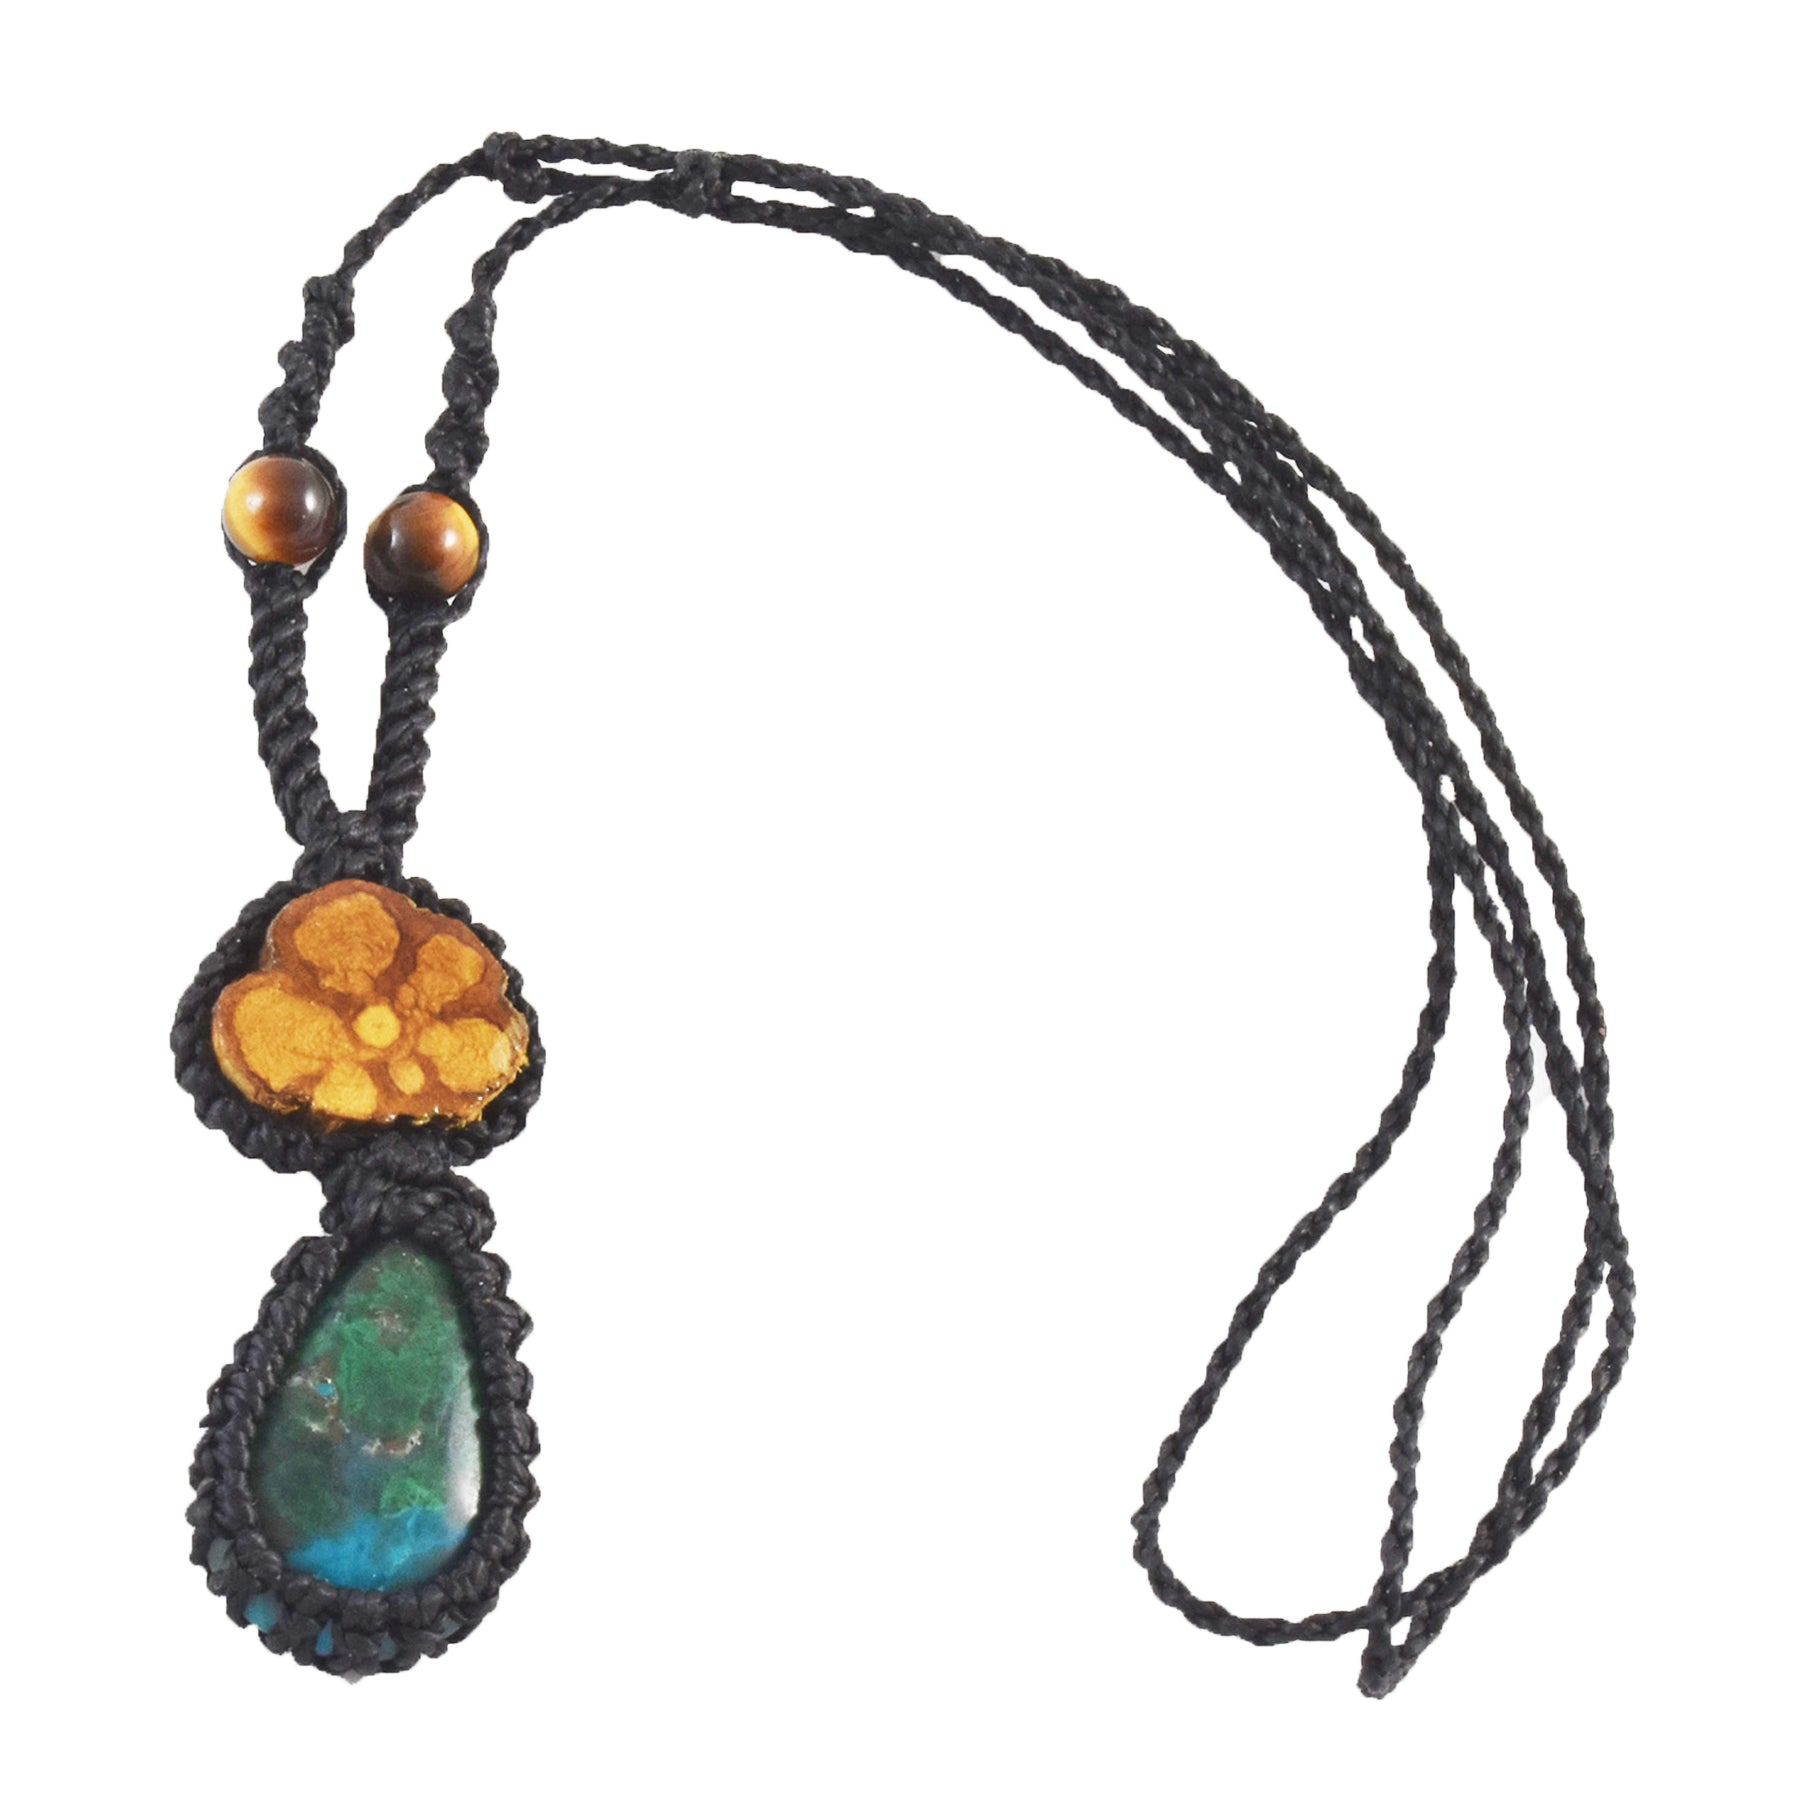 Peruvian green turquoise macrame necklace